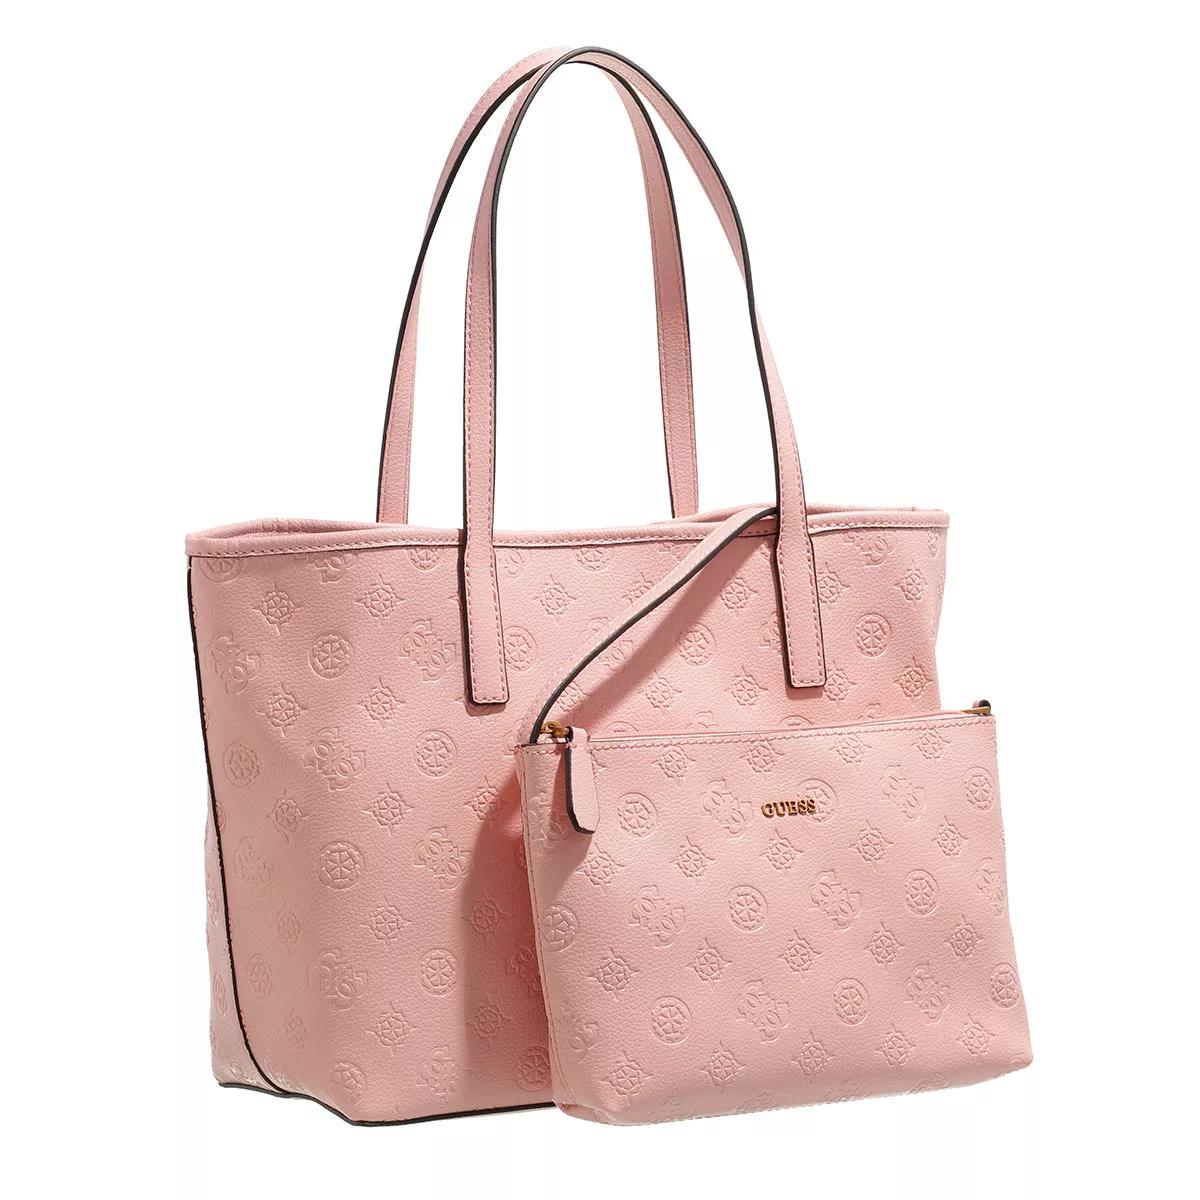 Guess Pink Vikky Tote Bag with Pouch (Pink) At Nykaa, Best Beauty Products Online